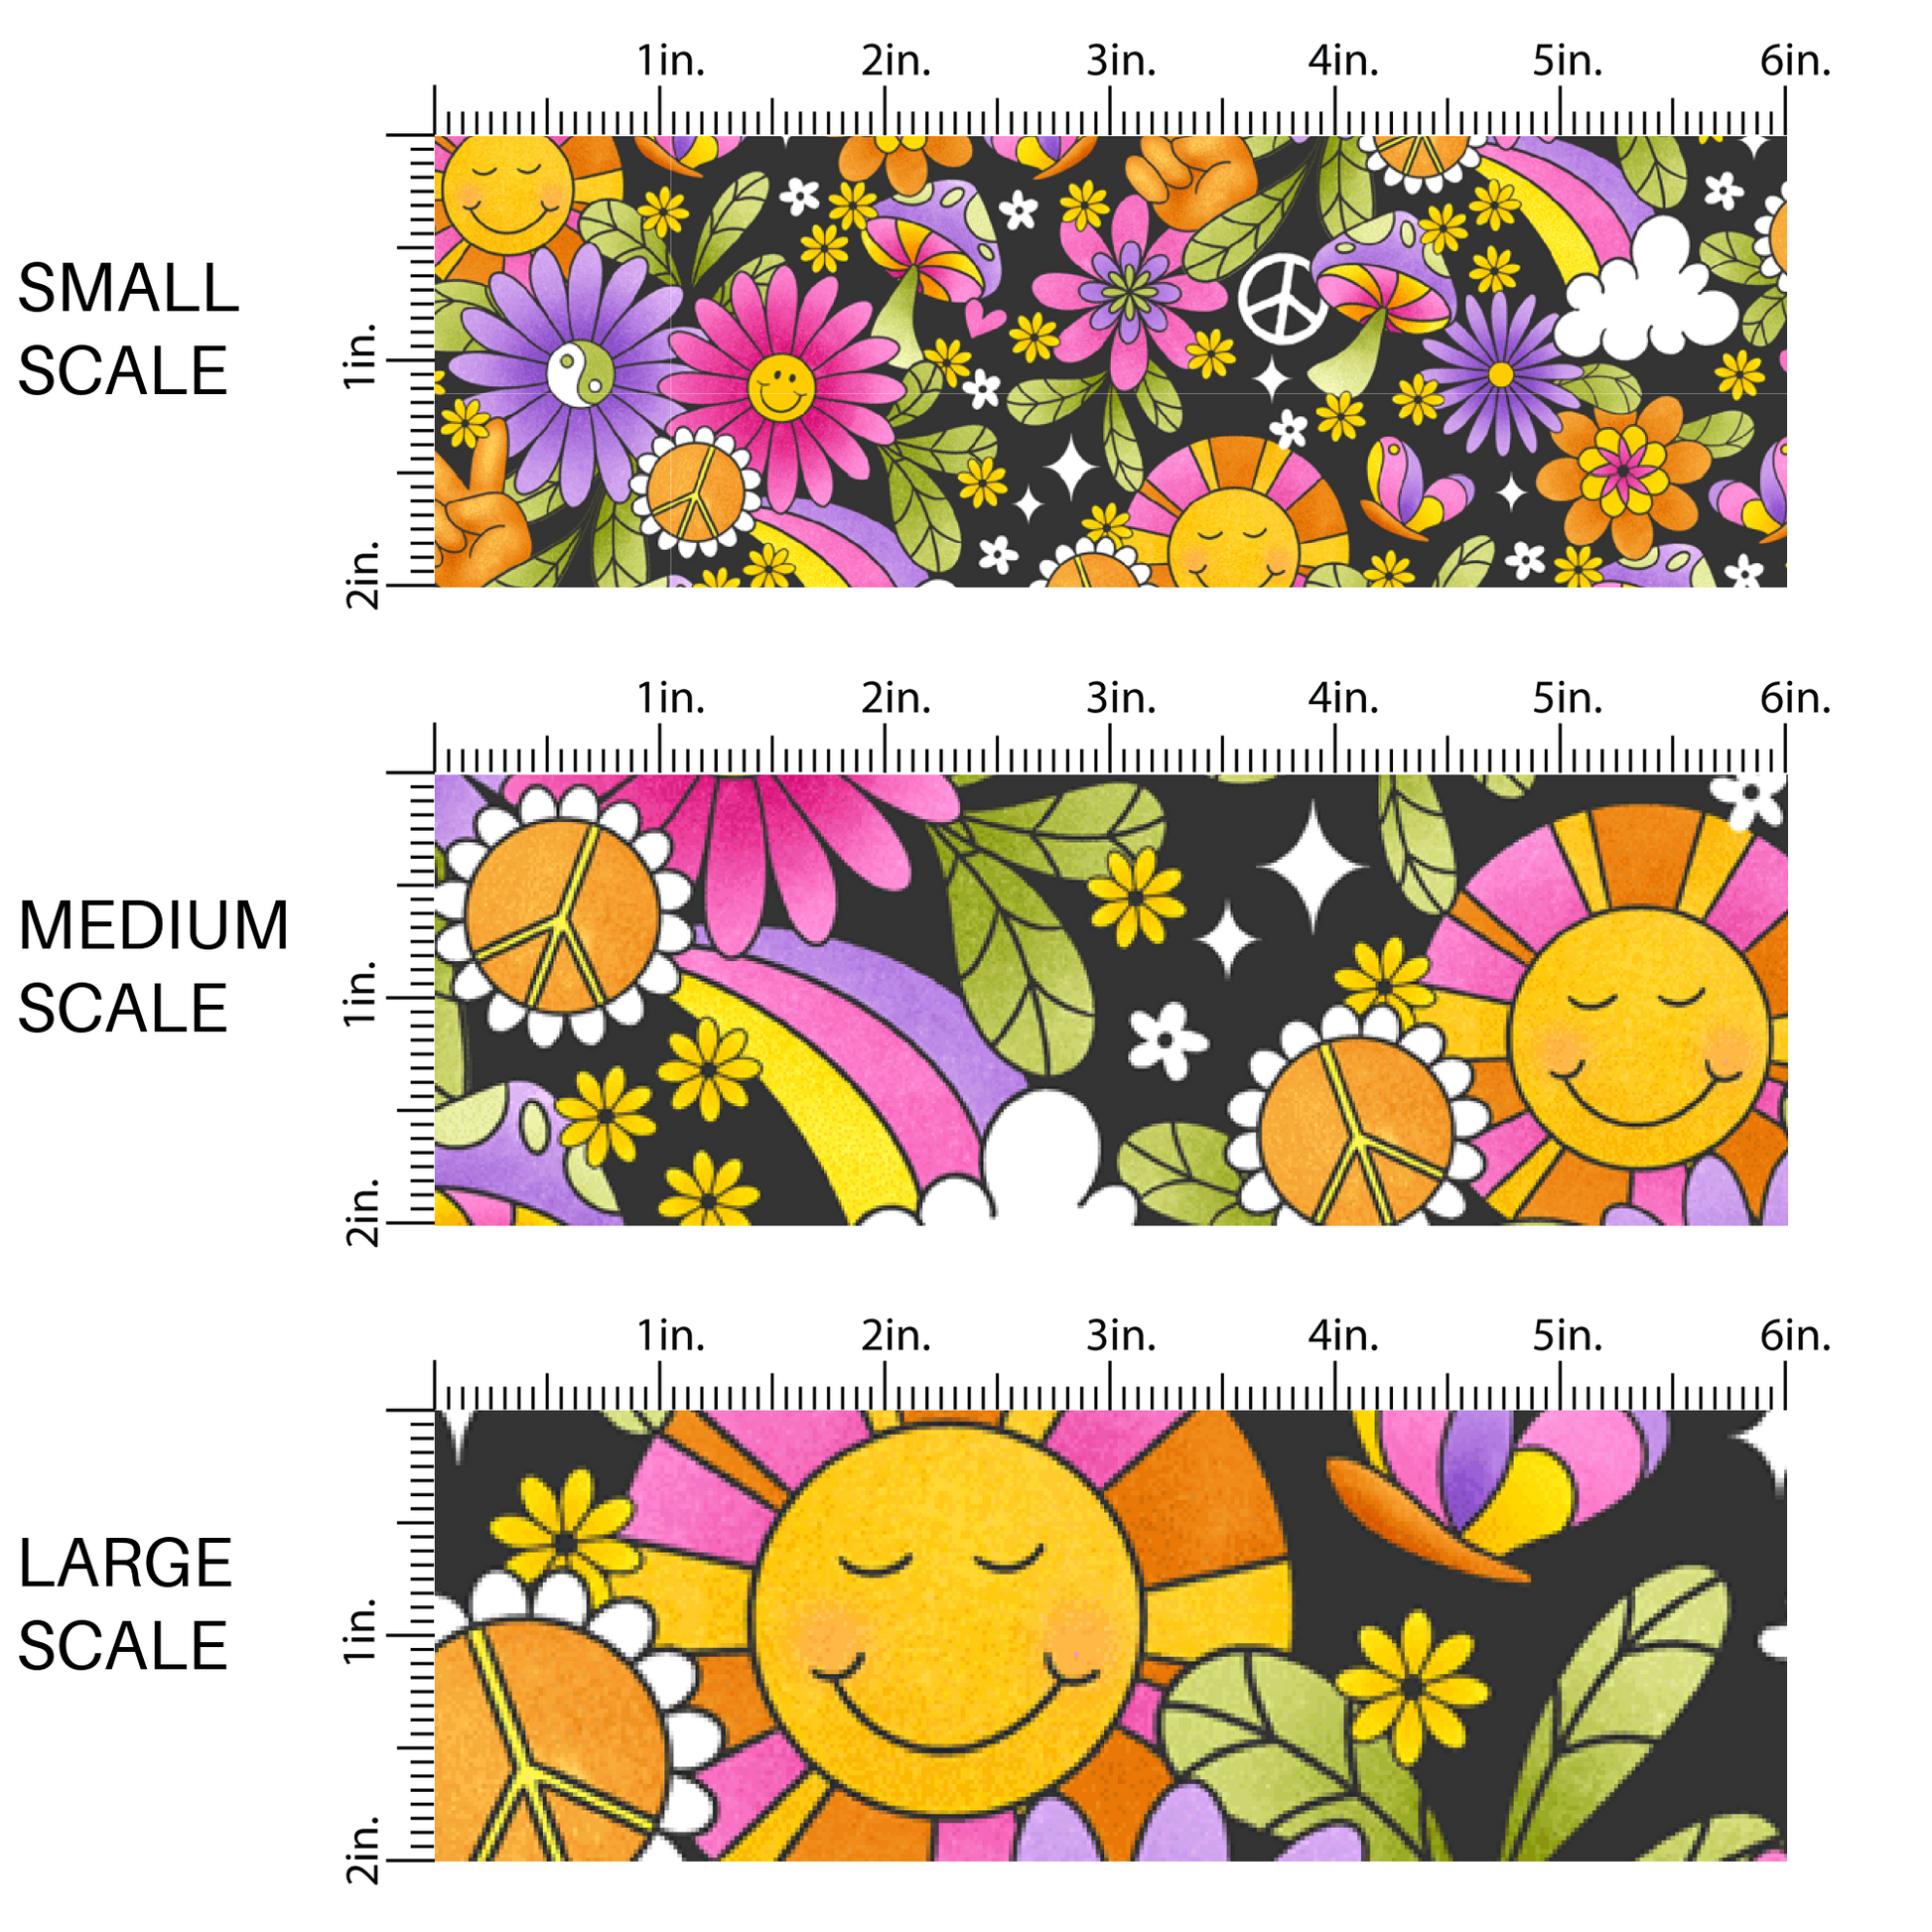 Groovy sunshines, rainbows, flowers, shrooms, and butterflies on black fabric scaling